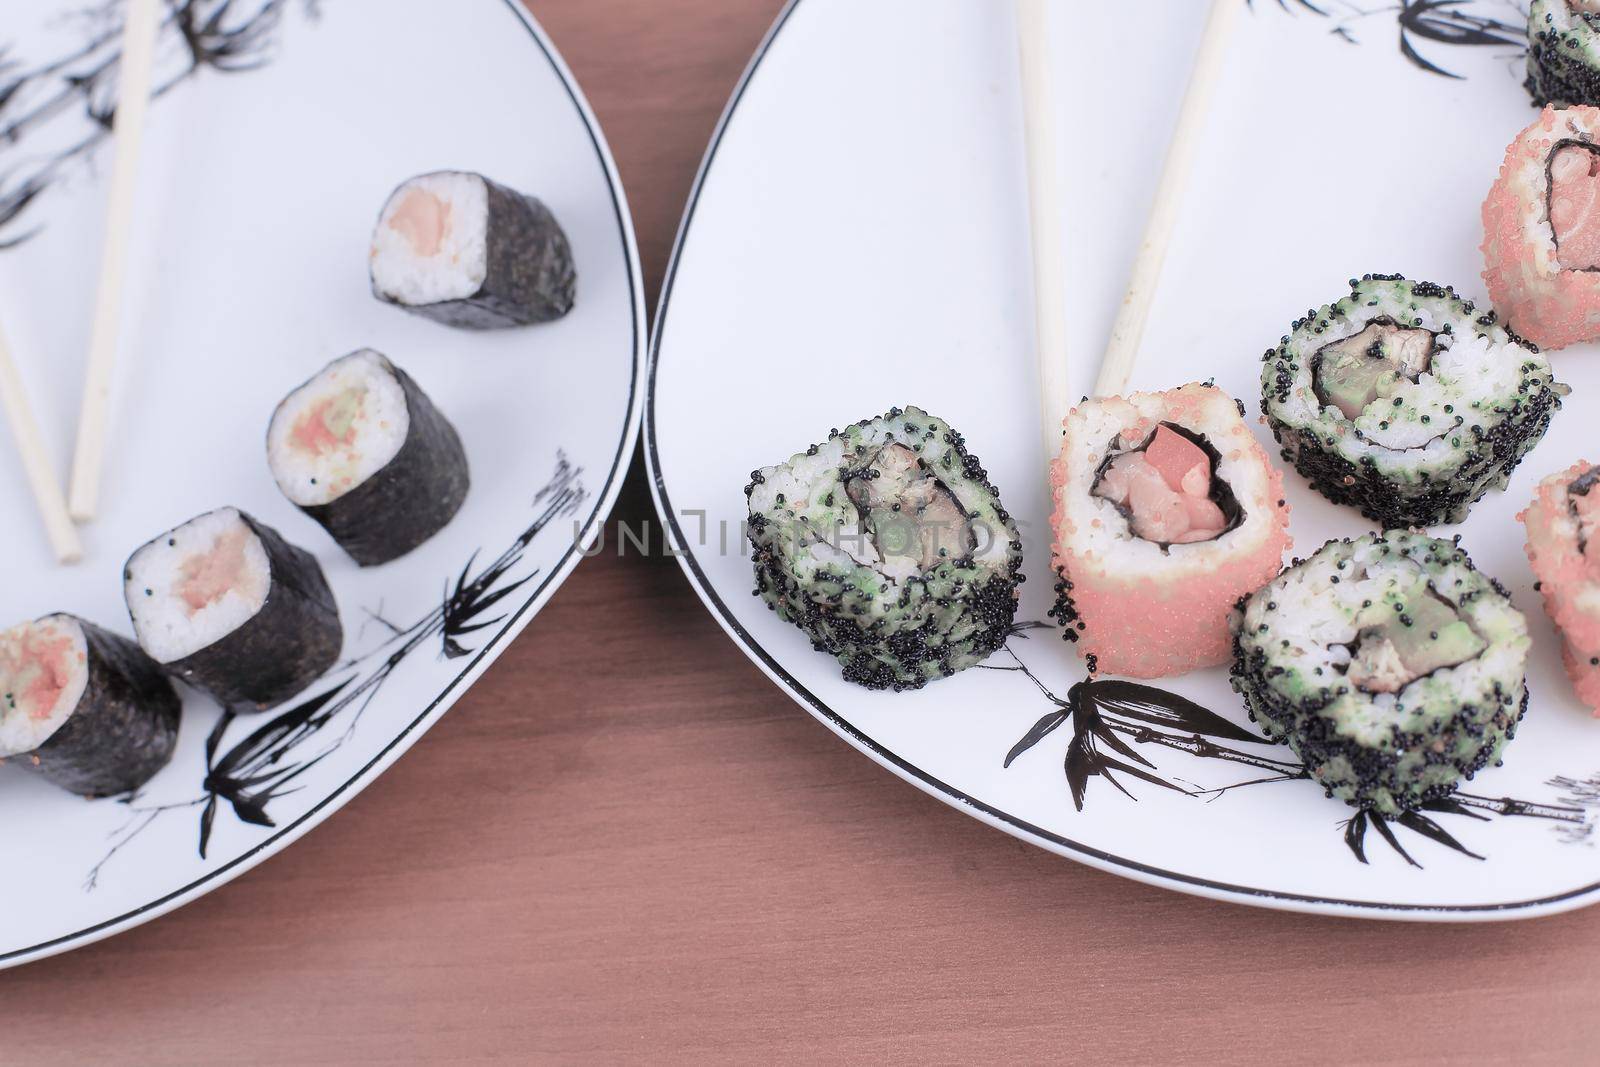 Roll of sushi prepared from raw fish and a special rice by SmartPhotoLab